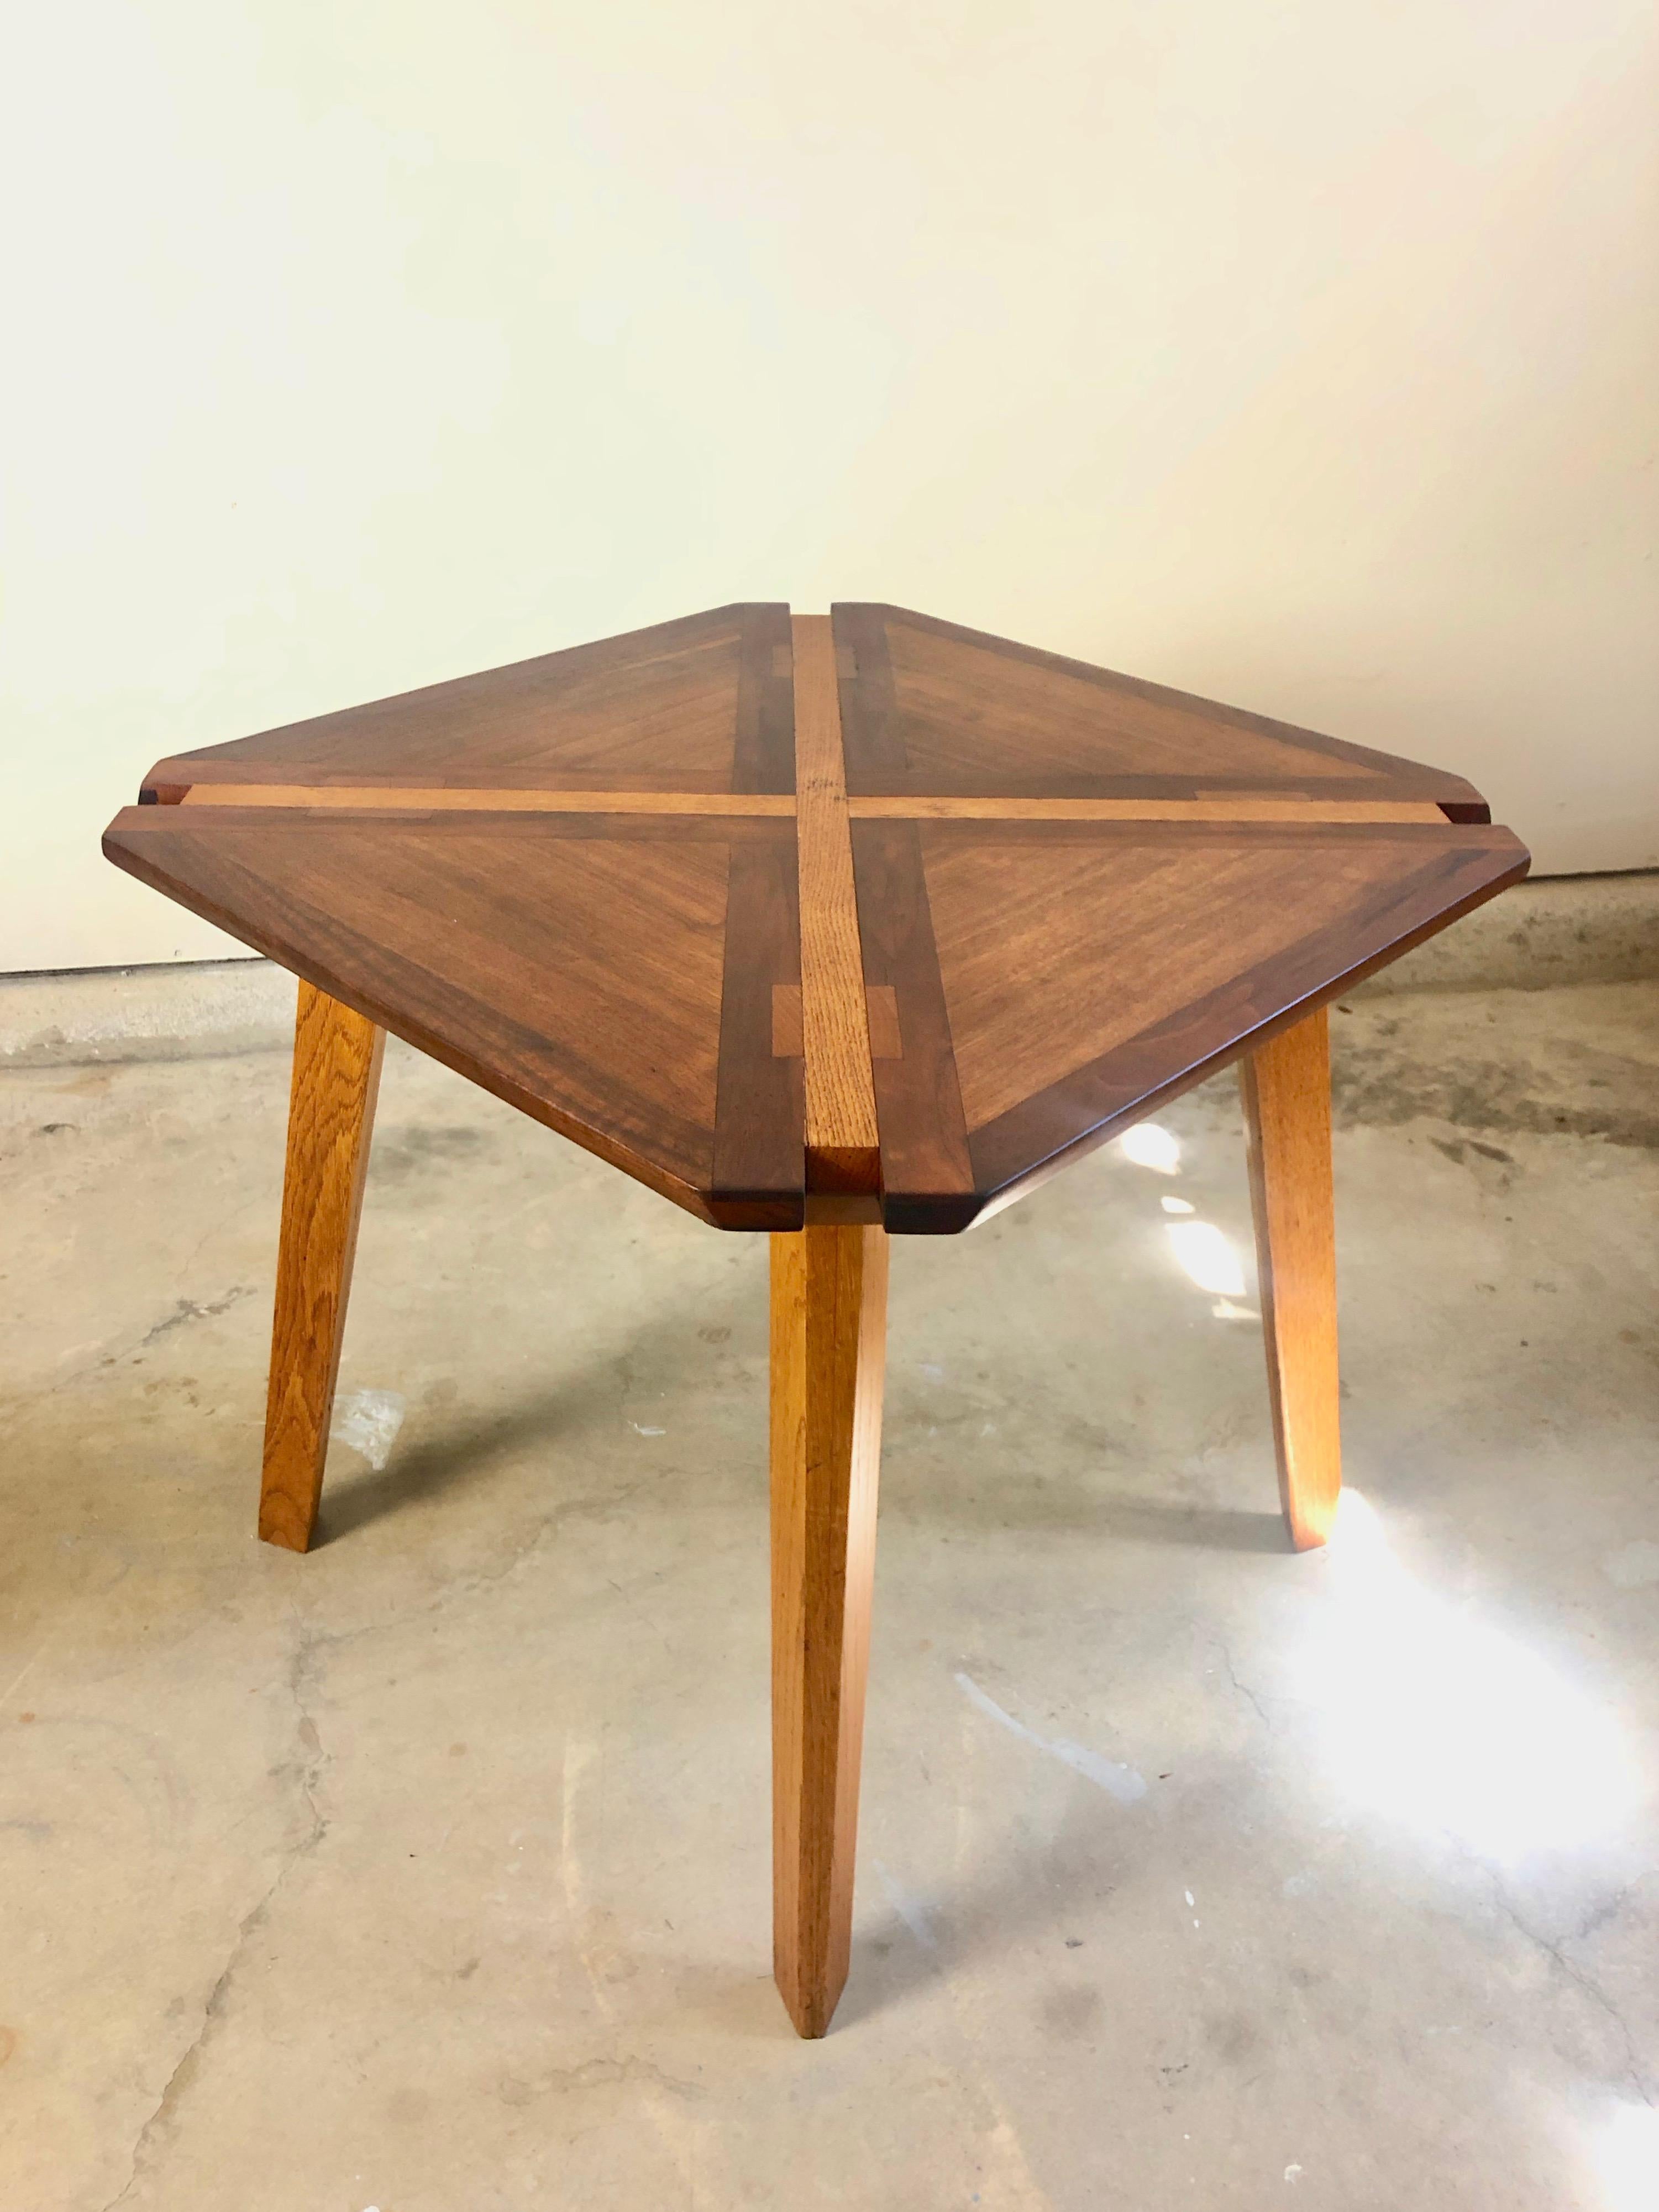 Studio Crafted Mixed Woods Dining Table / Game Table 3